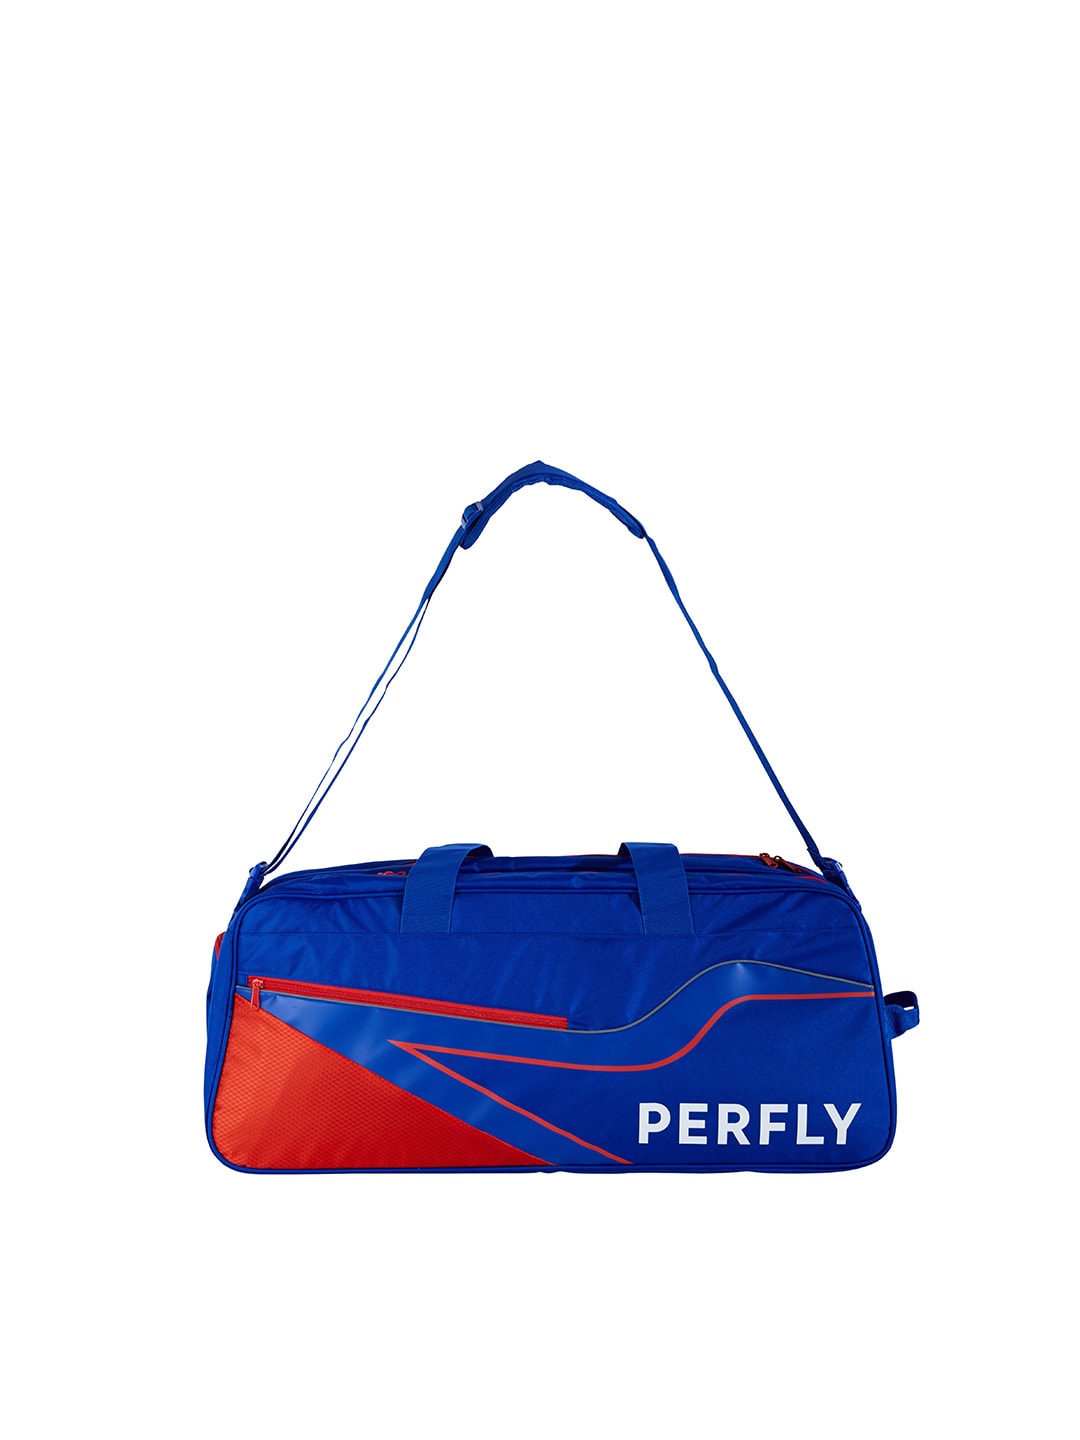 PERFLY By Decathlon Blue & Coral Colour-blocked Badminton Bag Price in India